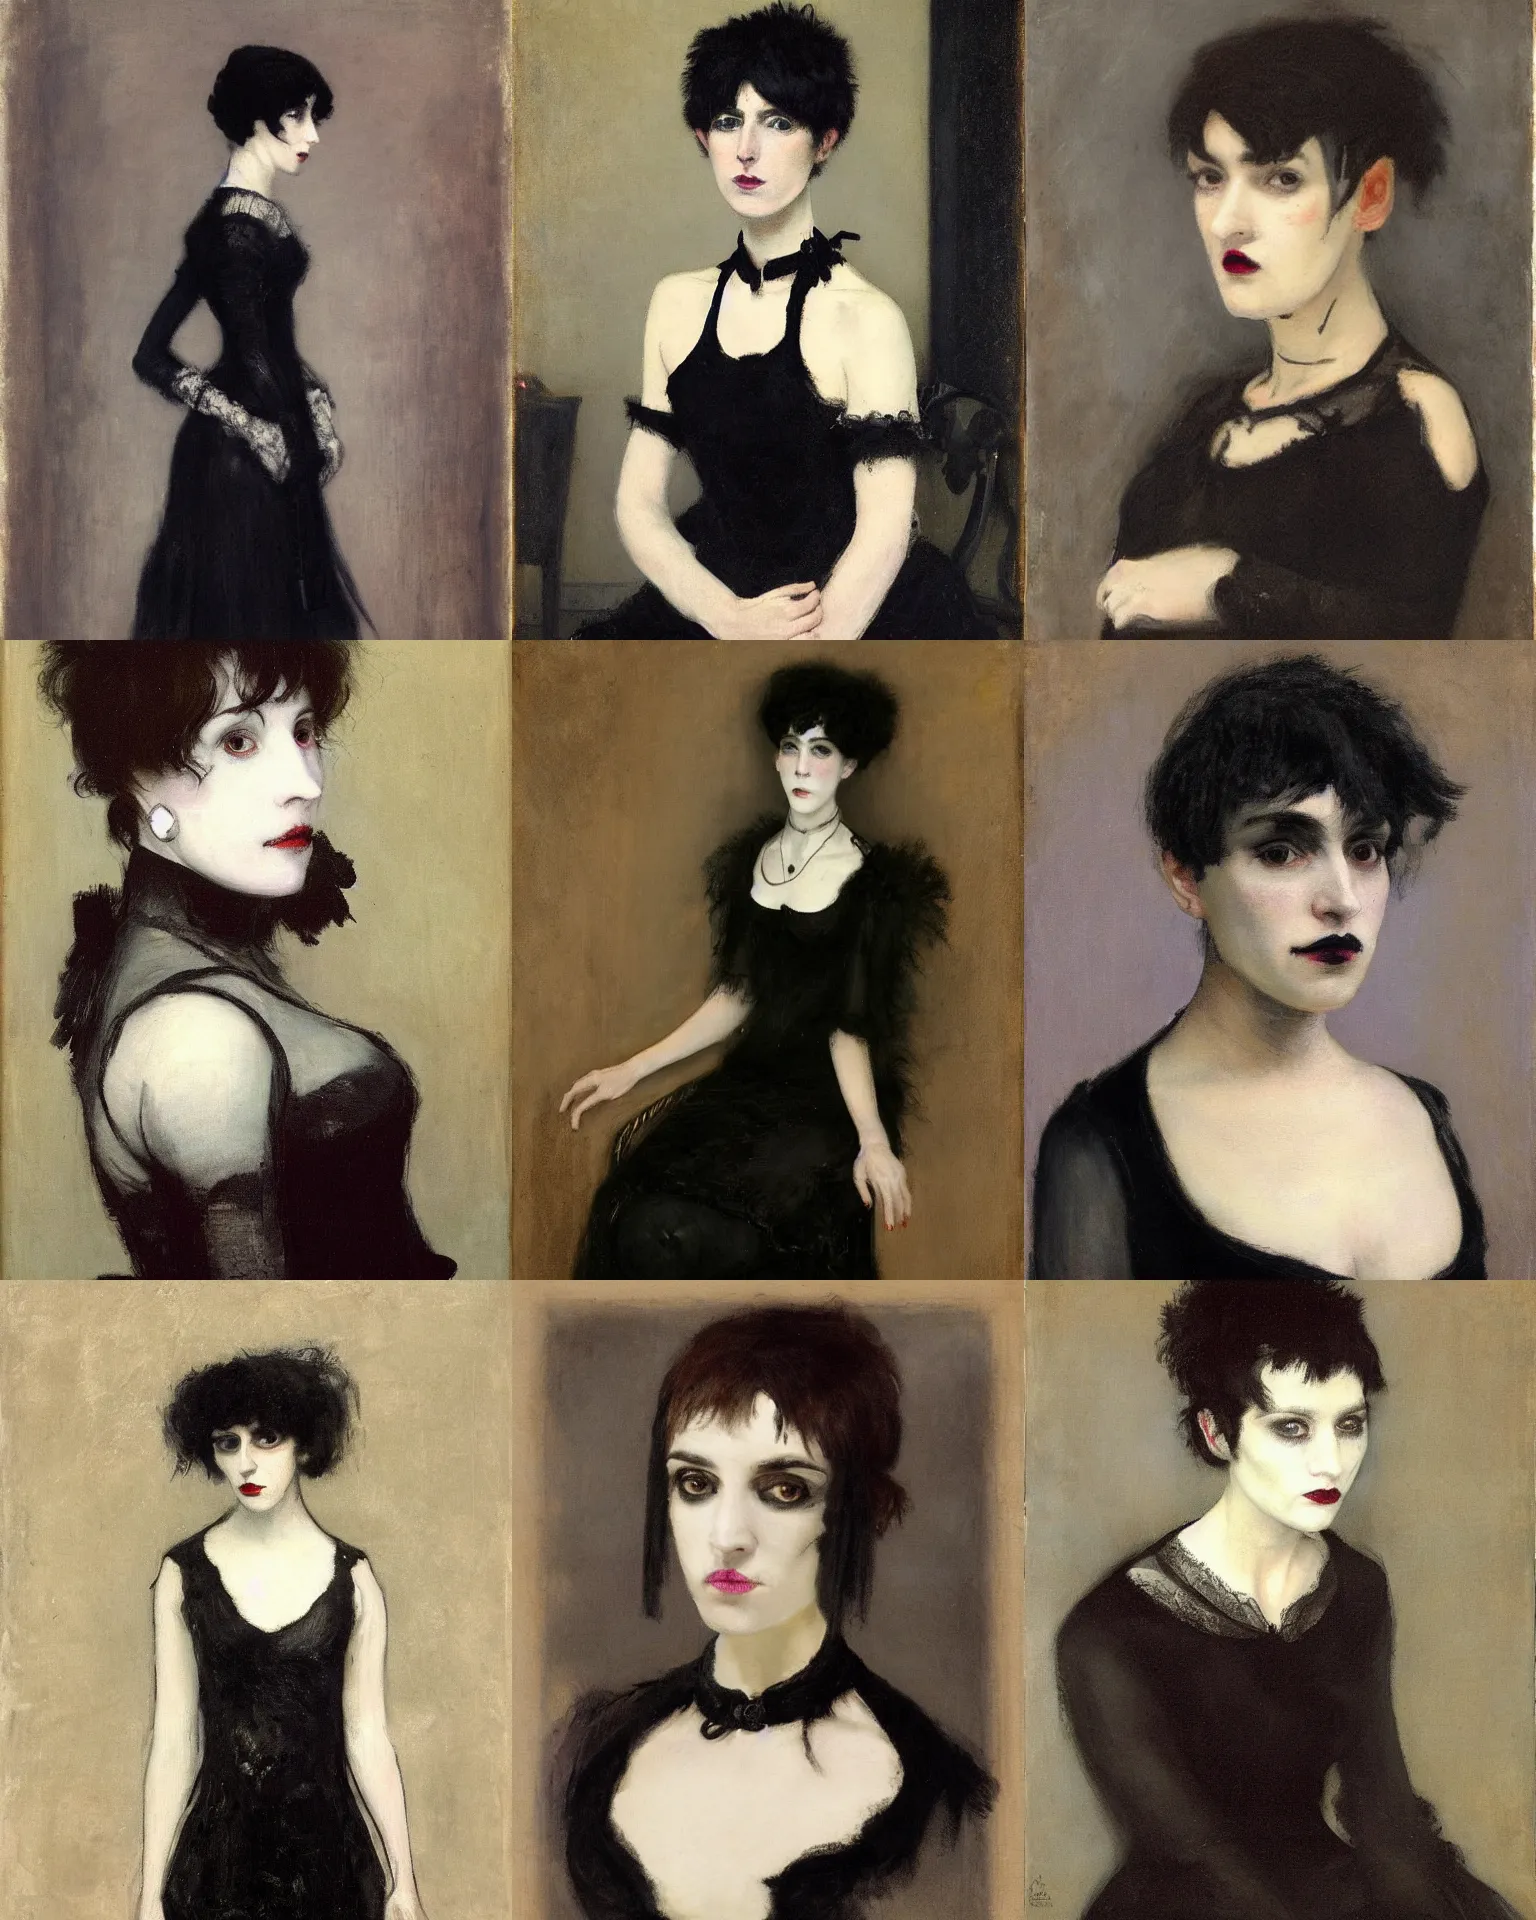 Prompt: A goth portrait painted by James McNeill Whistler. Her hair is dark brown and cut into a short, messy pixie cut. She has a slightly rounded face, with a pointed chin, large entirely-black eyes, and a small nose. She is wearing a black tank top, a black leather jacket, a black knee-length skirt, a black choker, and black leather boots.